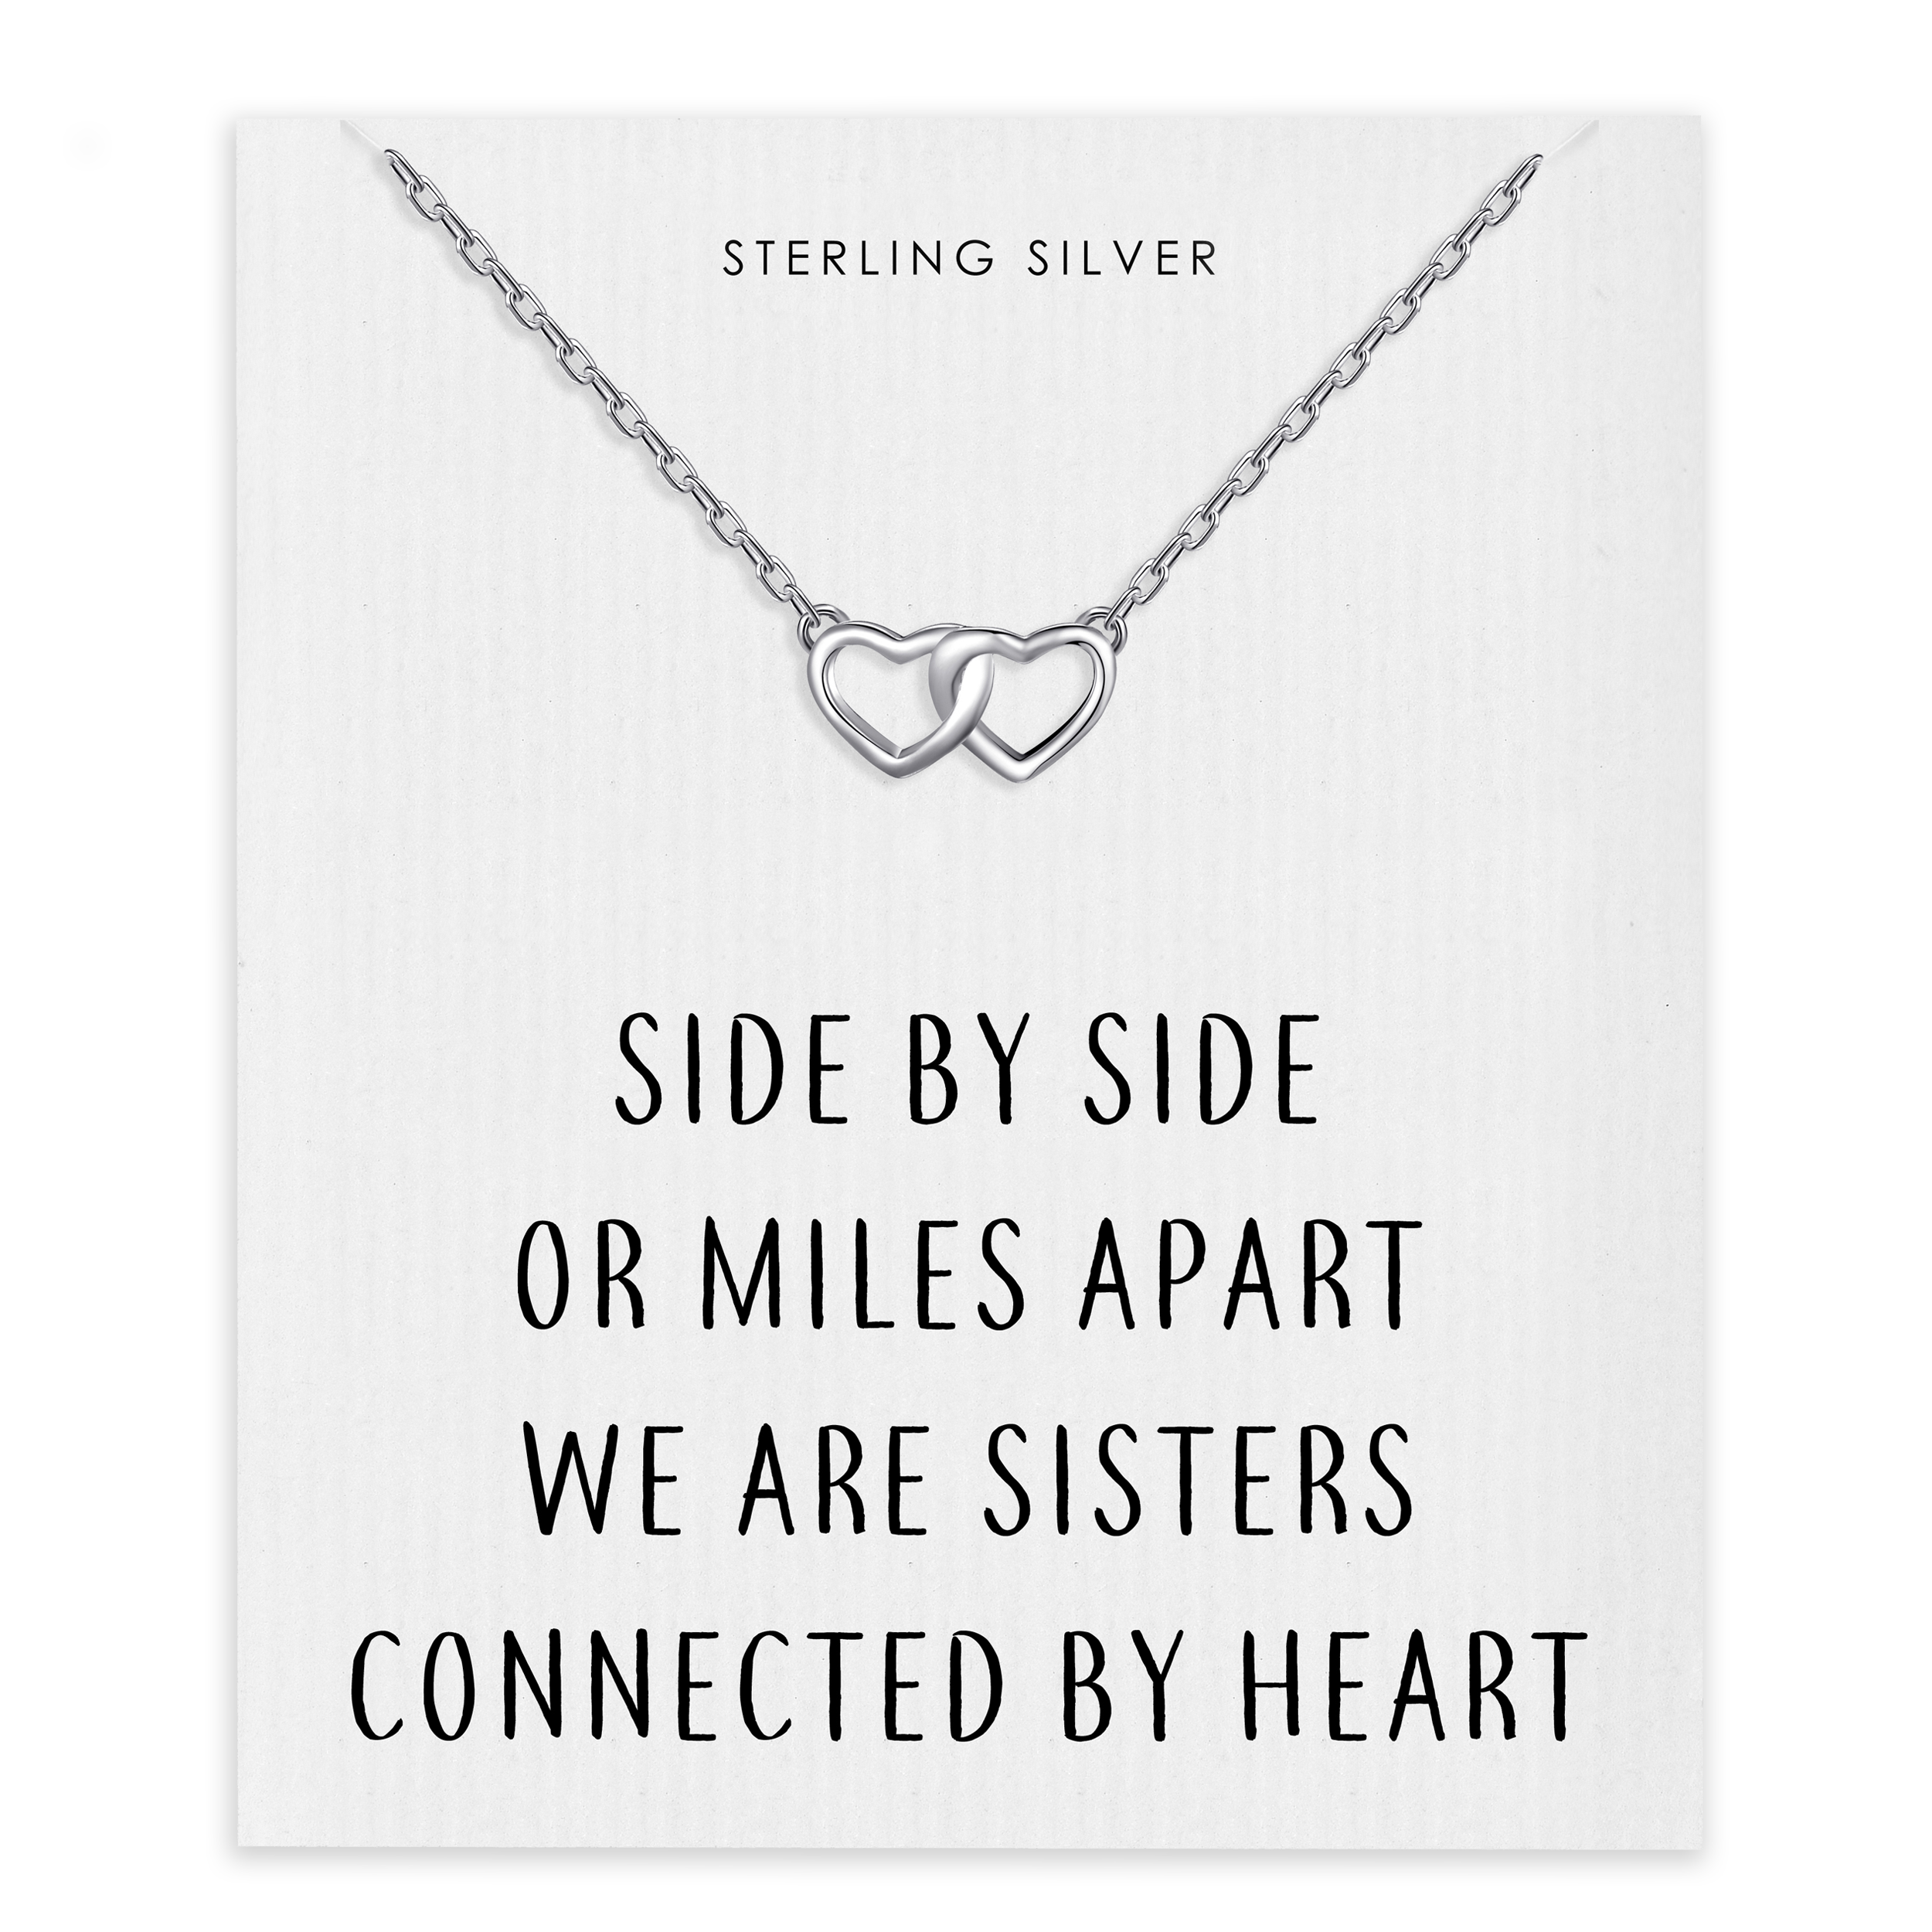 Sterling Silver Sister Heart Link Necklace with Quote Card